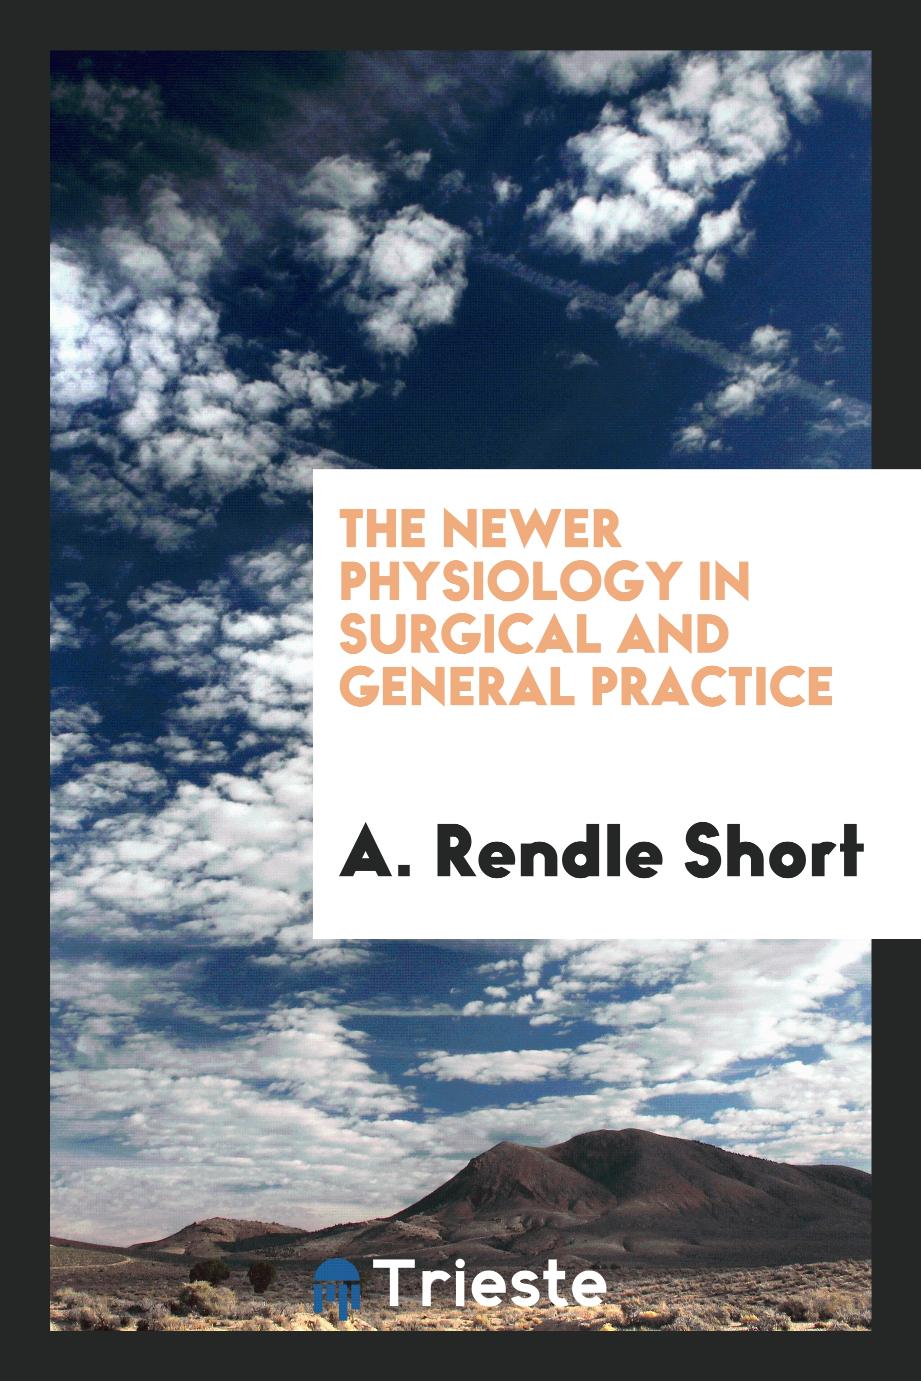 The newer physiology in surgical and general practice